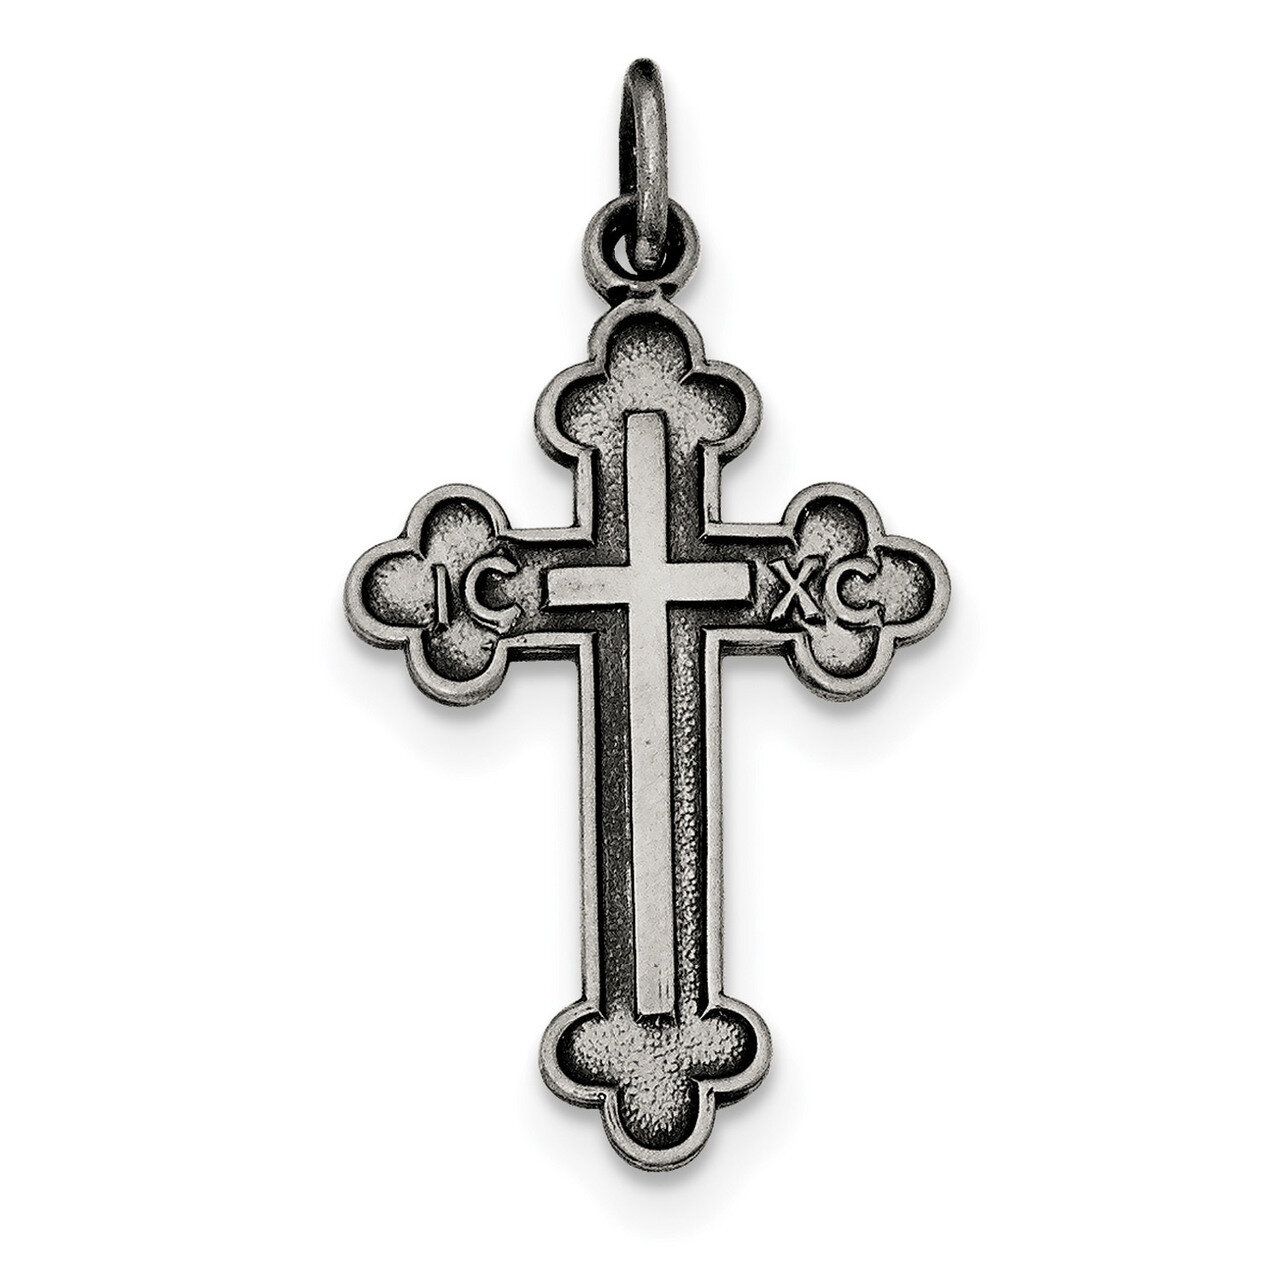 Textured and Brushed Latin Cross Pendant Sterling Silver Antiqued QC8130